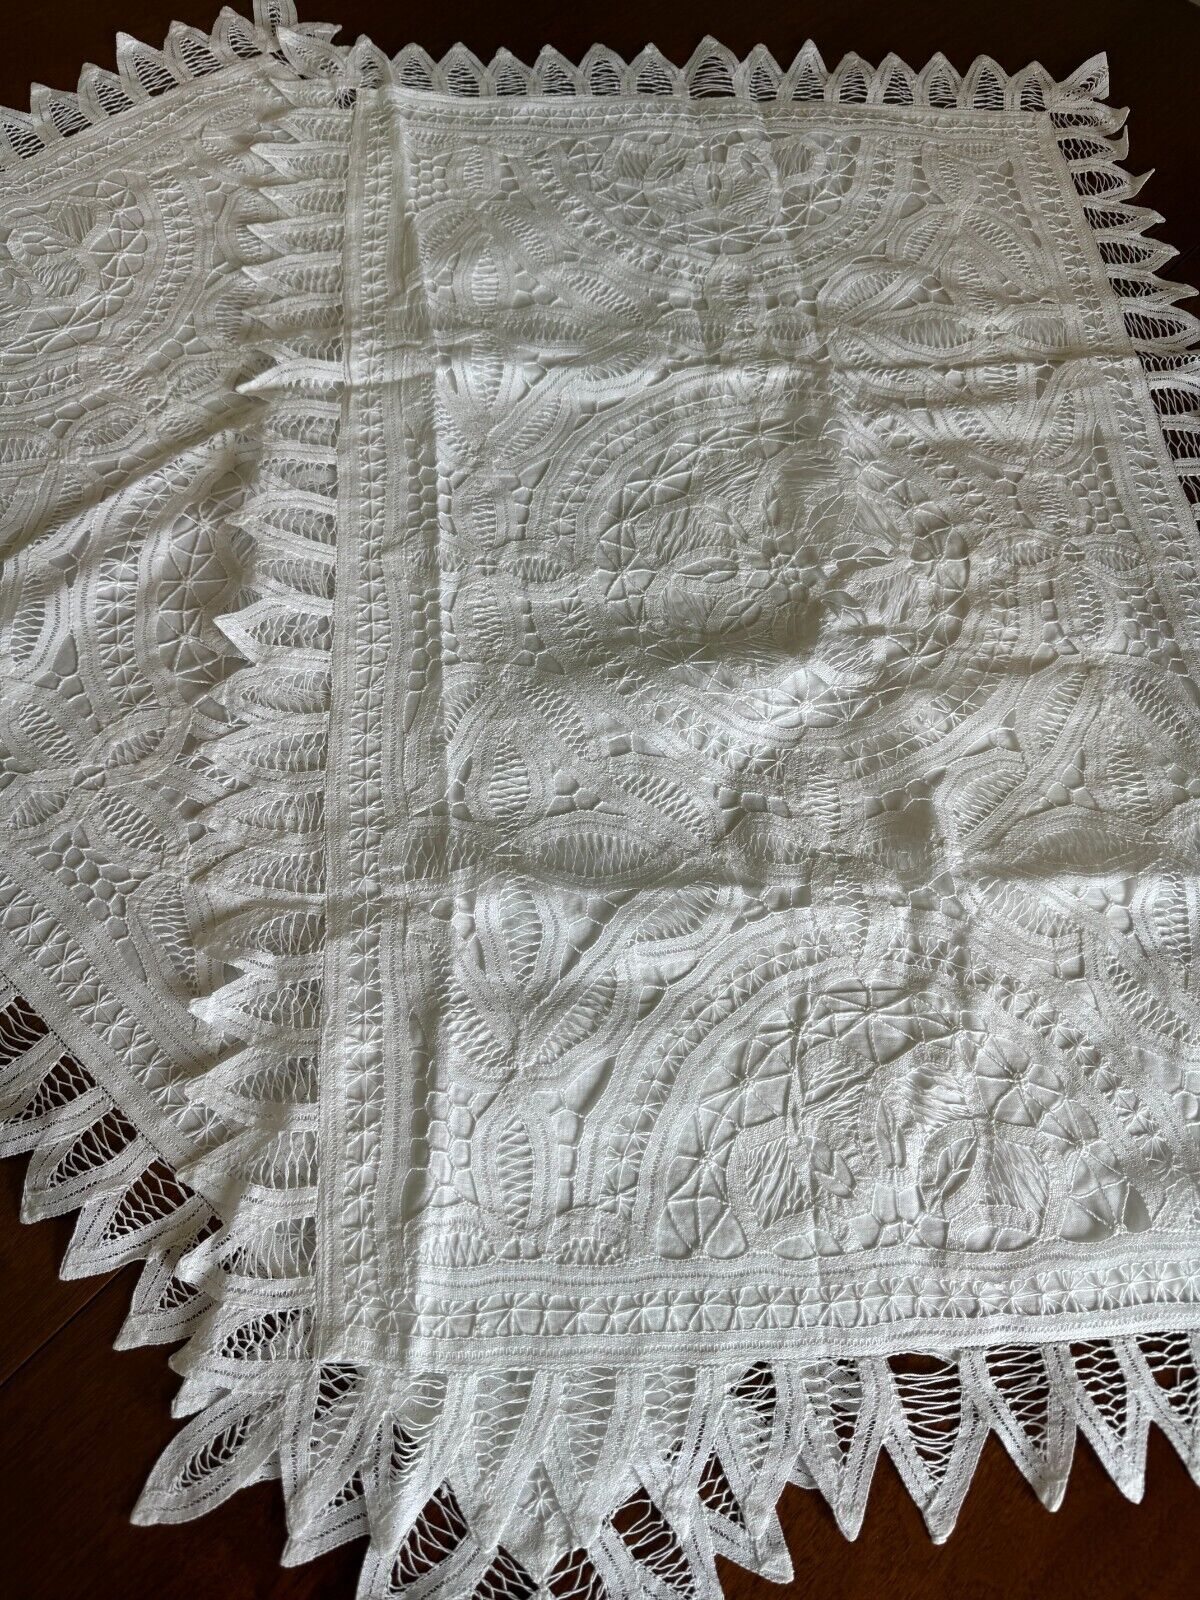 PILLOW CASES EMBROIDERED LACE 2 SET WHITE COTTON 30 x 21 INCHES HAND MADE #2